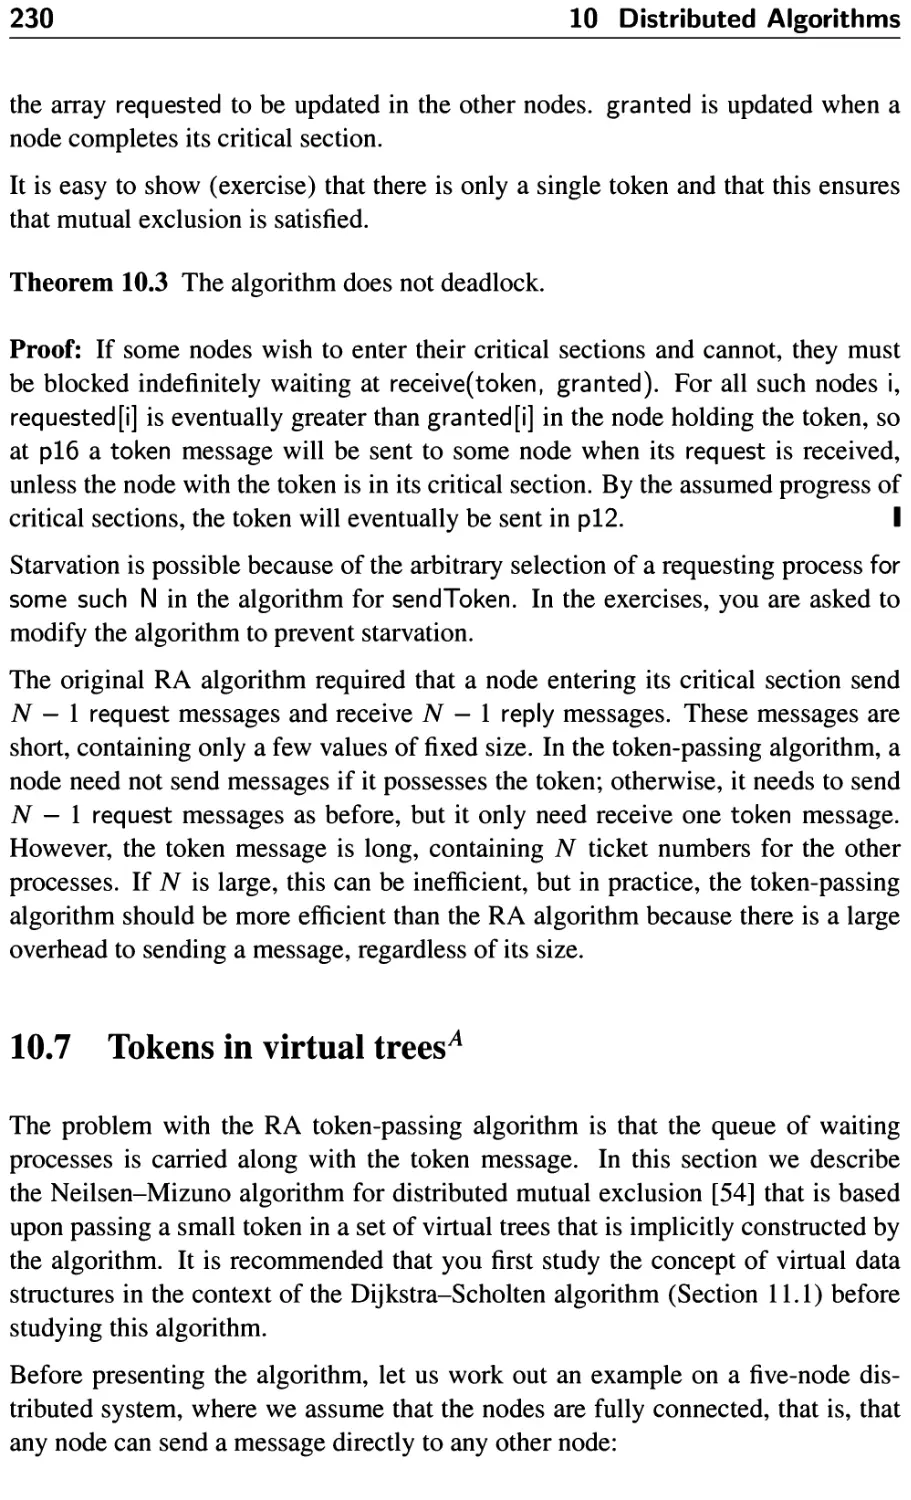 10.7 Tokens in virtual trees